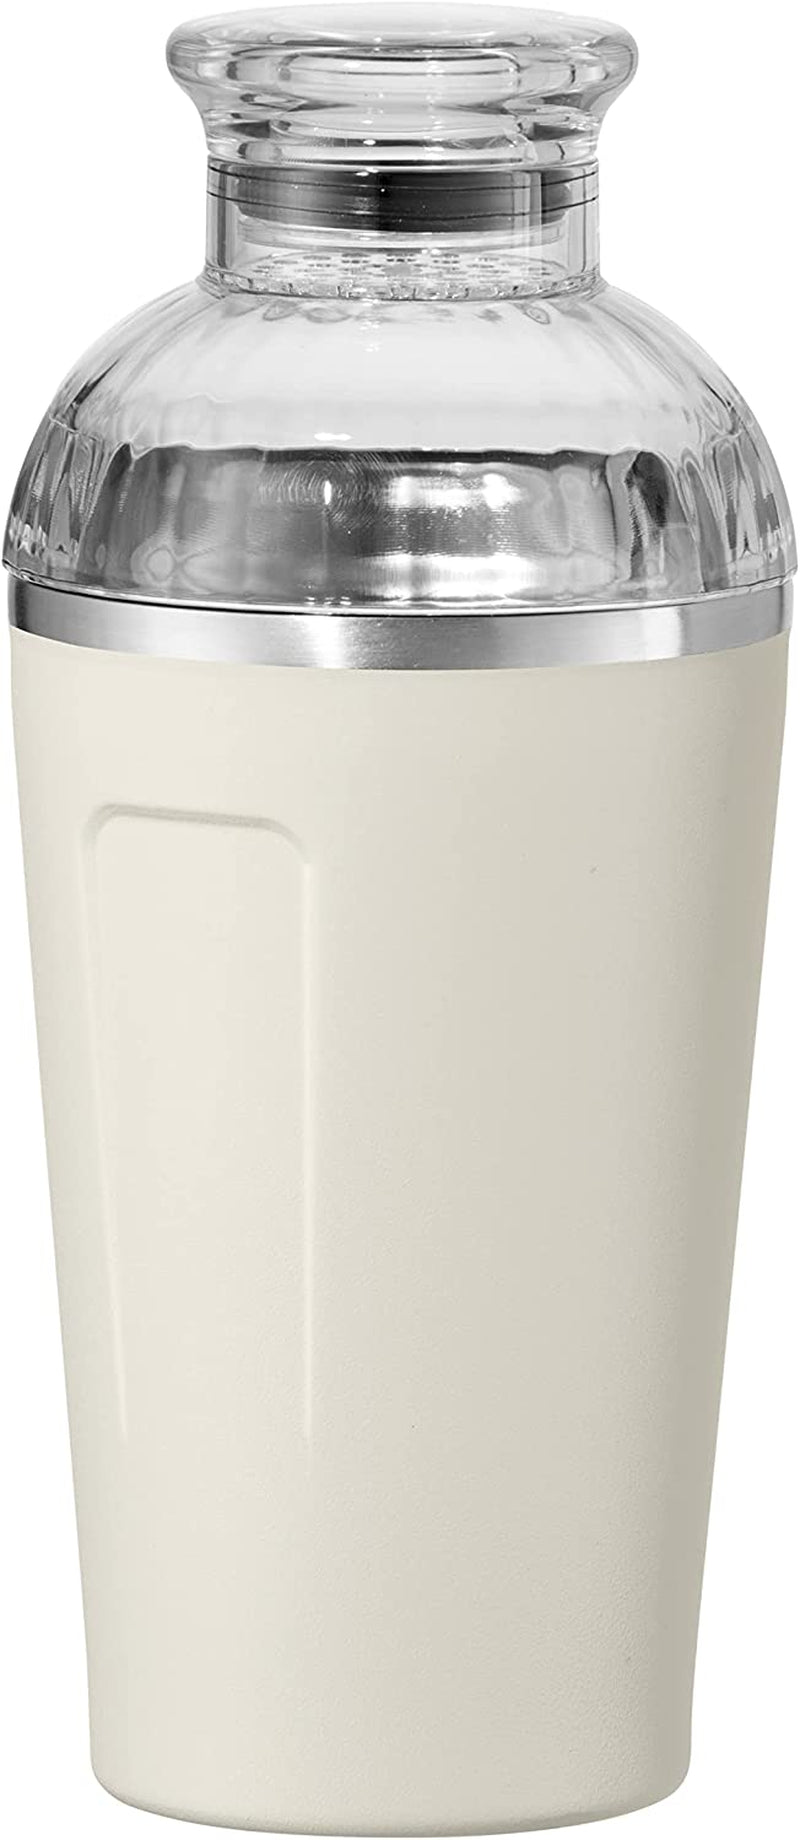 Oggi Groove Insulated Cocktail Shaker-17Oz Double Wall Vacuum Insulated Stainless Steel Shaker, Tritan Lid Has Built in Strainer, Ideal Cocktail, Martini Shaker, Margarita Shaker, Gold (7404.4) Home & Garden > Kitchen & Dining > Barware Oggi Gray 17-Ounce 